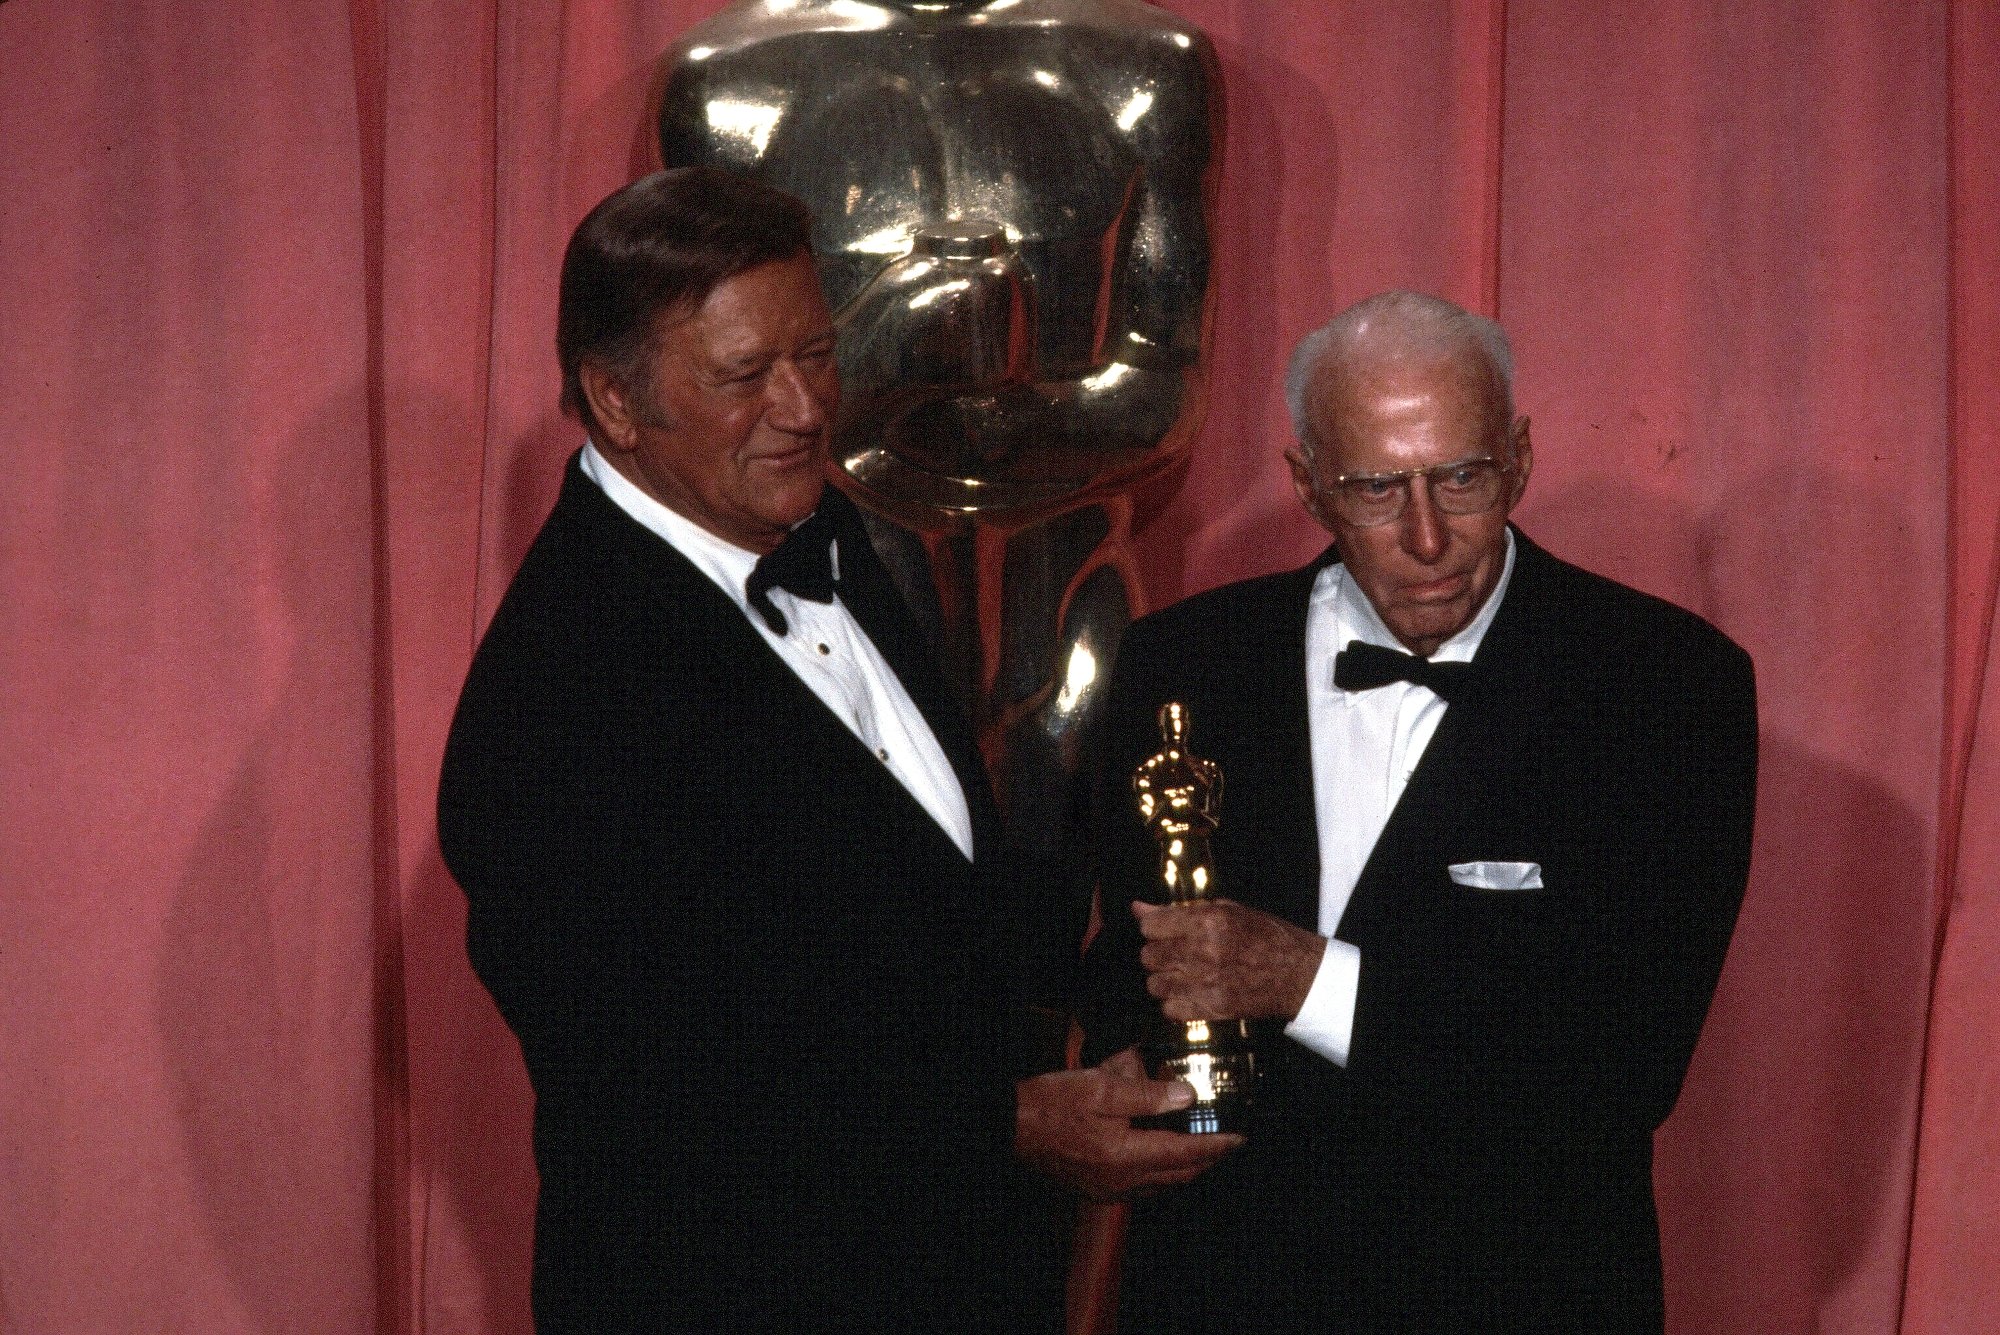 John Wayne and Howard Hawks at the 1975 Oscars holding the Honorary Award together in front of red curtains